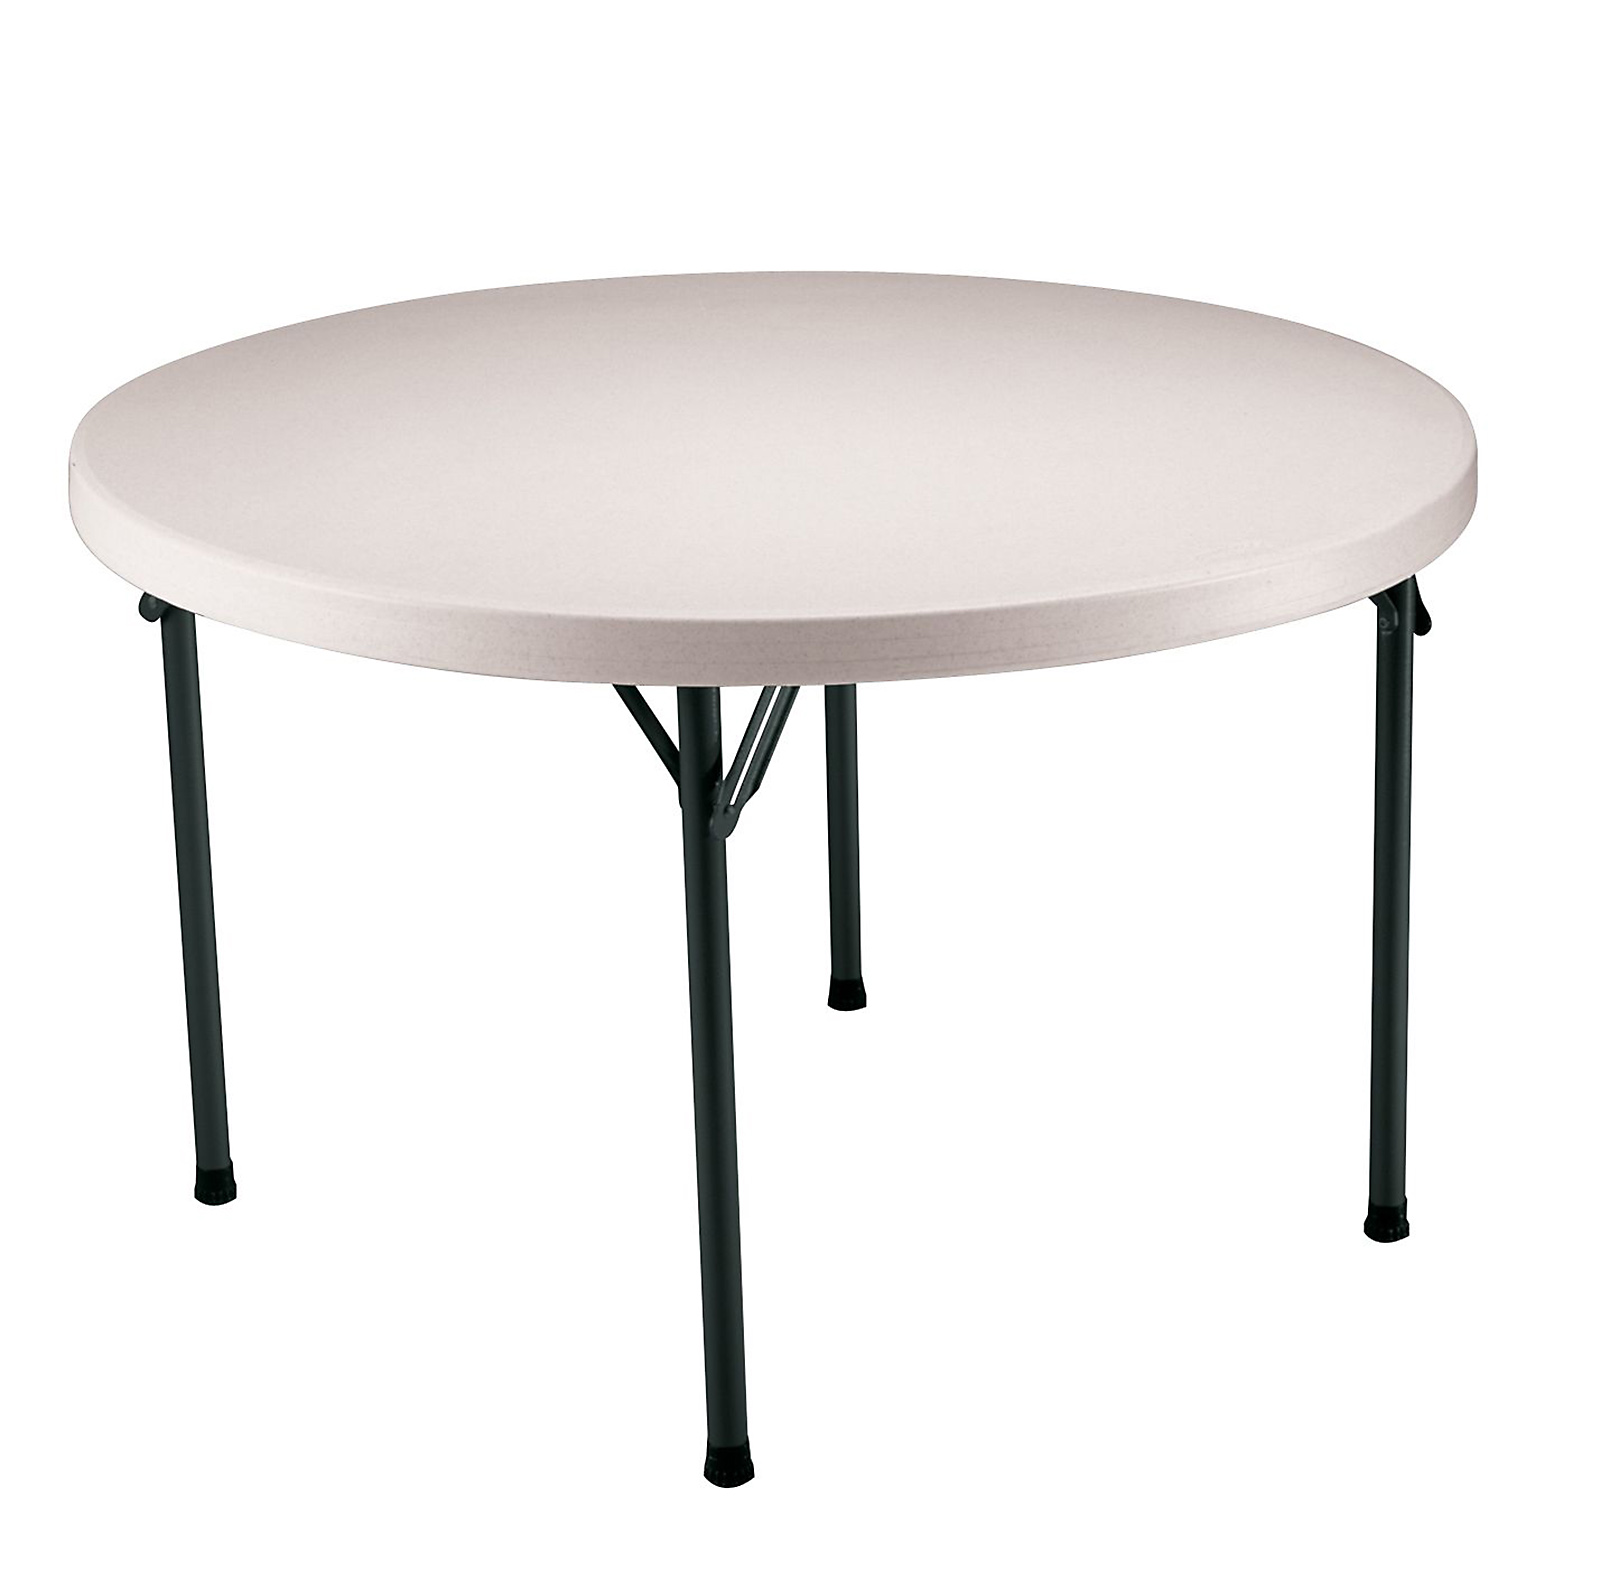 Lifetime  48 in. Round Folding Table